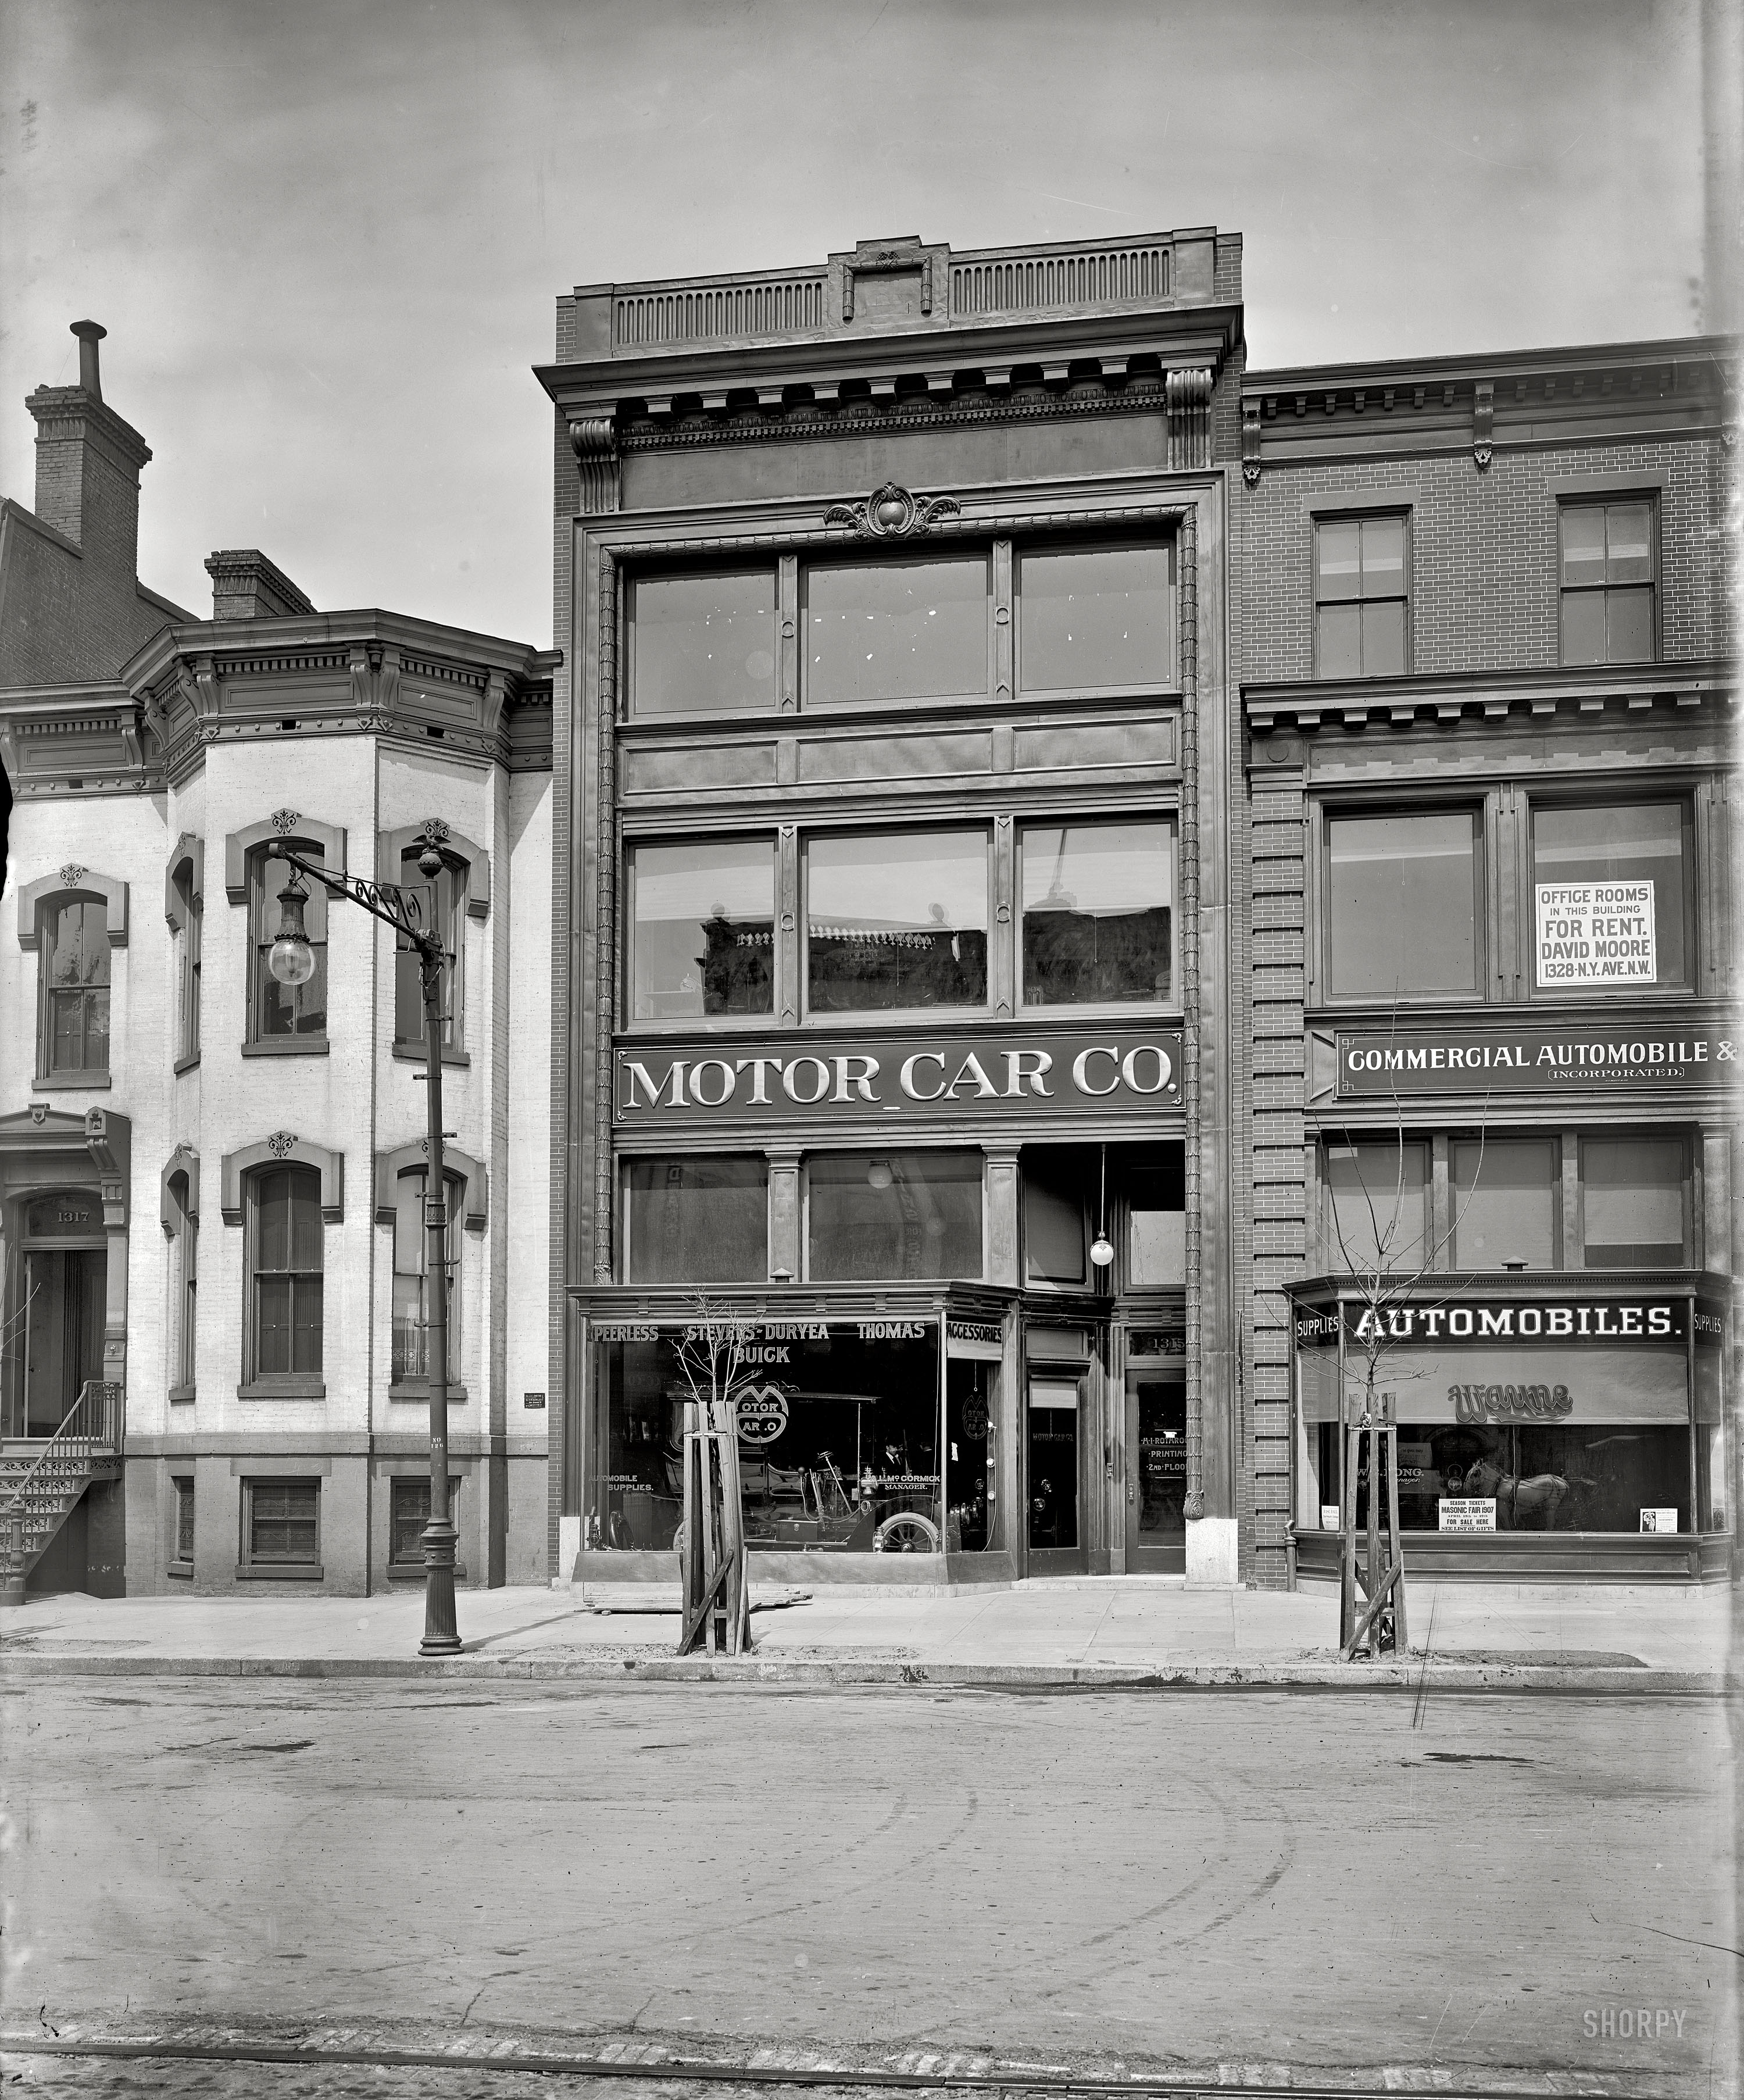 Washington, D.C., circa 1907. "A.L. McCormick garage, New York Avenue." Early automobile retailing in the nation's capital, an outpost of what the Washington Post called "the world's greatest fad." Harris & Ewing Collection. View full size.